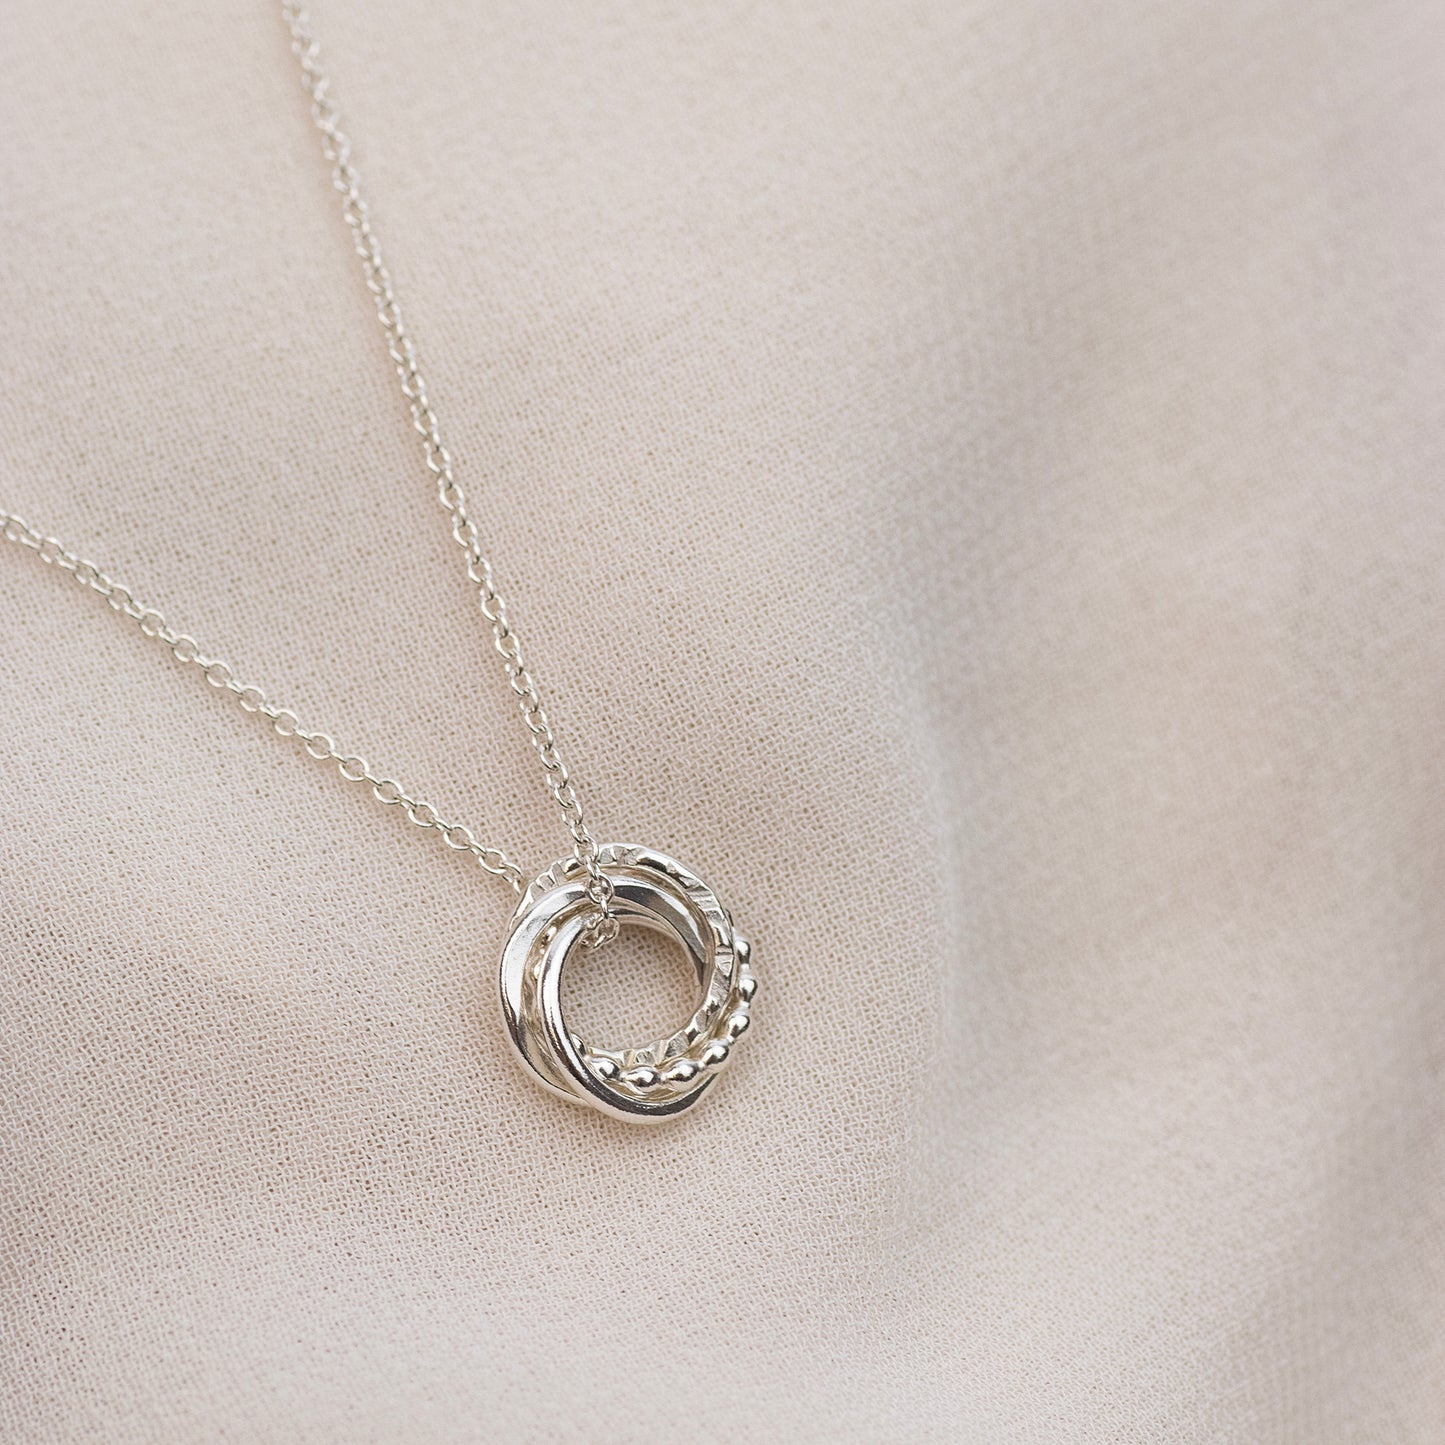 4 Sisters Necklace - Silver Love Knot - Linked for a Lifetime